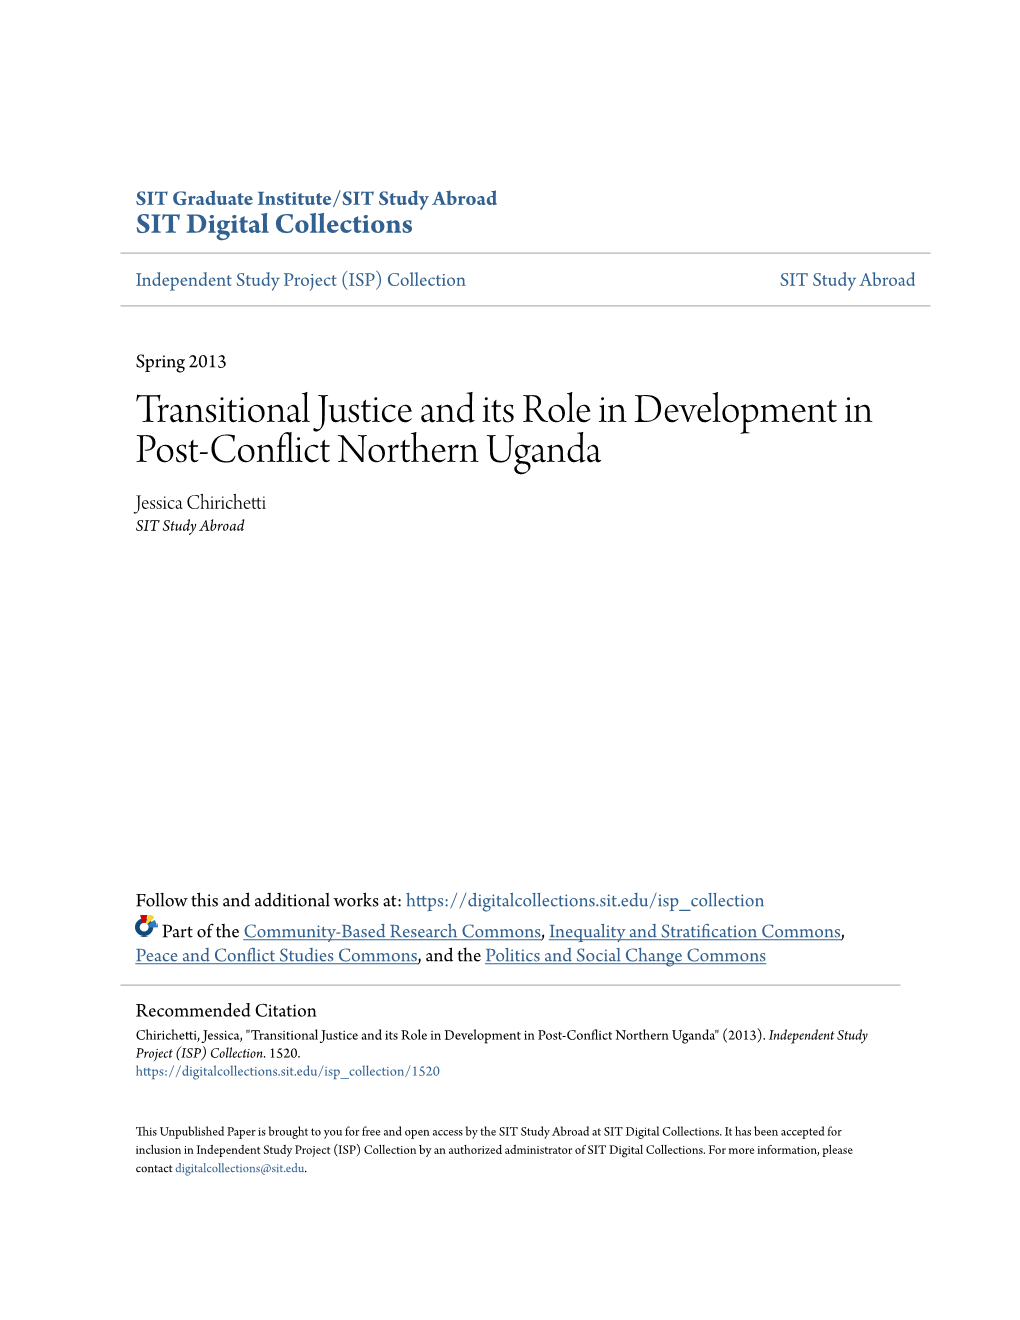 Transitional Justice and Its Role in Development in Post-Conflict Northern Uganda Jessica Chirichetti SIT Study Abroad